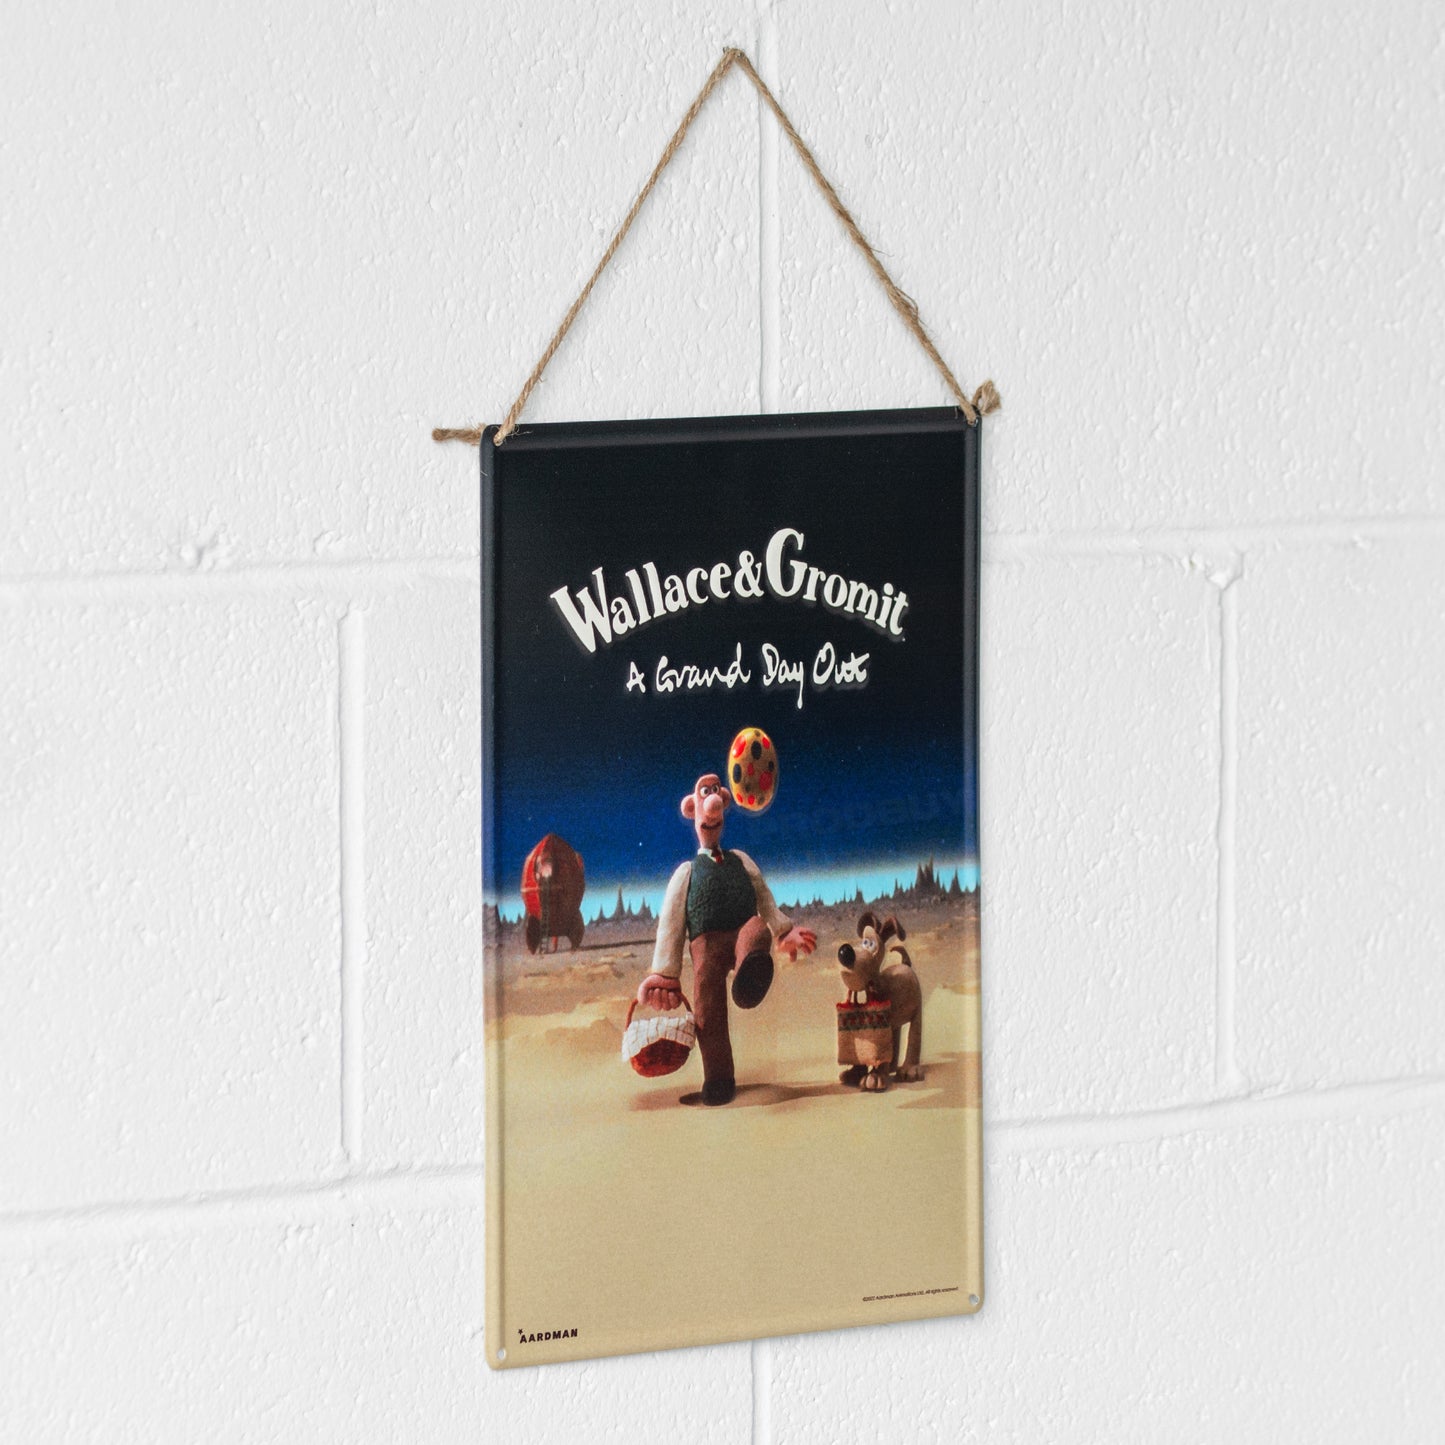 Wallace & Gromit 'A Grand Day Out' 35cm Metal Wall Sign